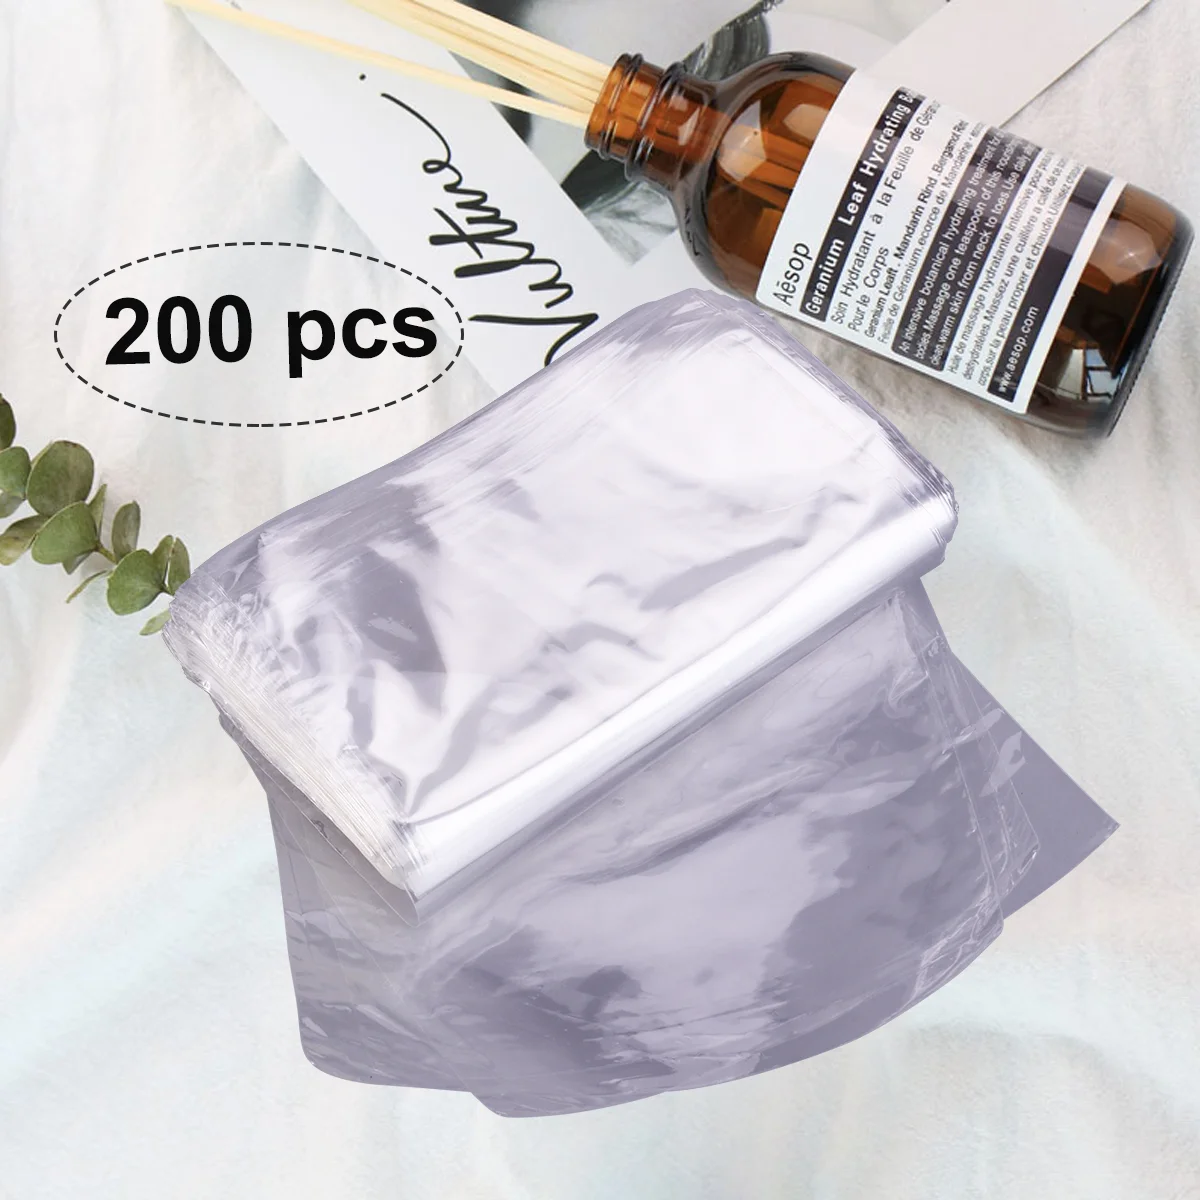 

Shrink Wrap Heatfor Bath Soap Bombs Filmbomb Packagaing Pvc Shoe Gift Packaging Sealerbaskets Pouchcellophane Roll Wrapper